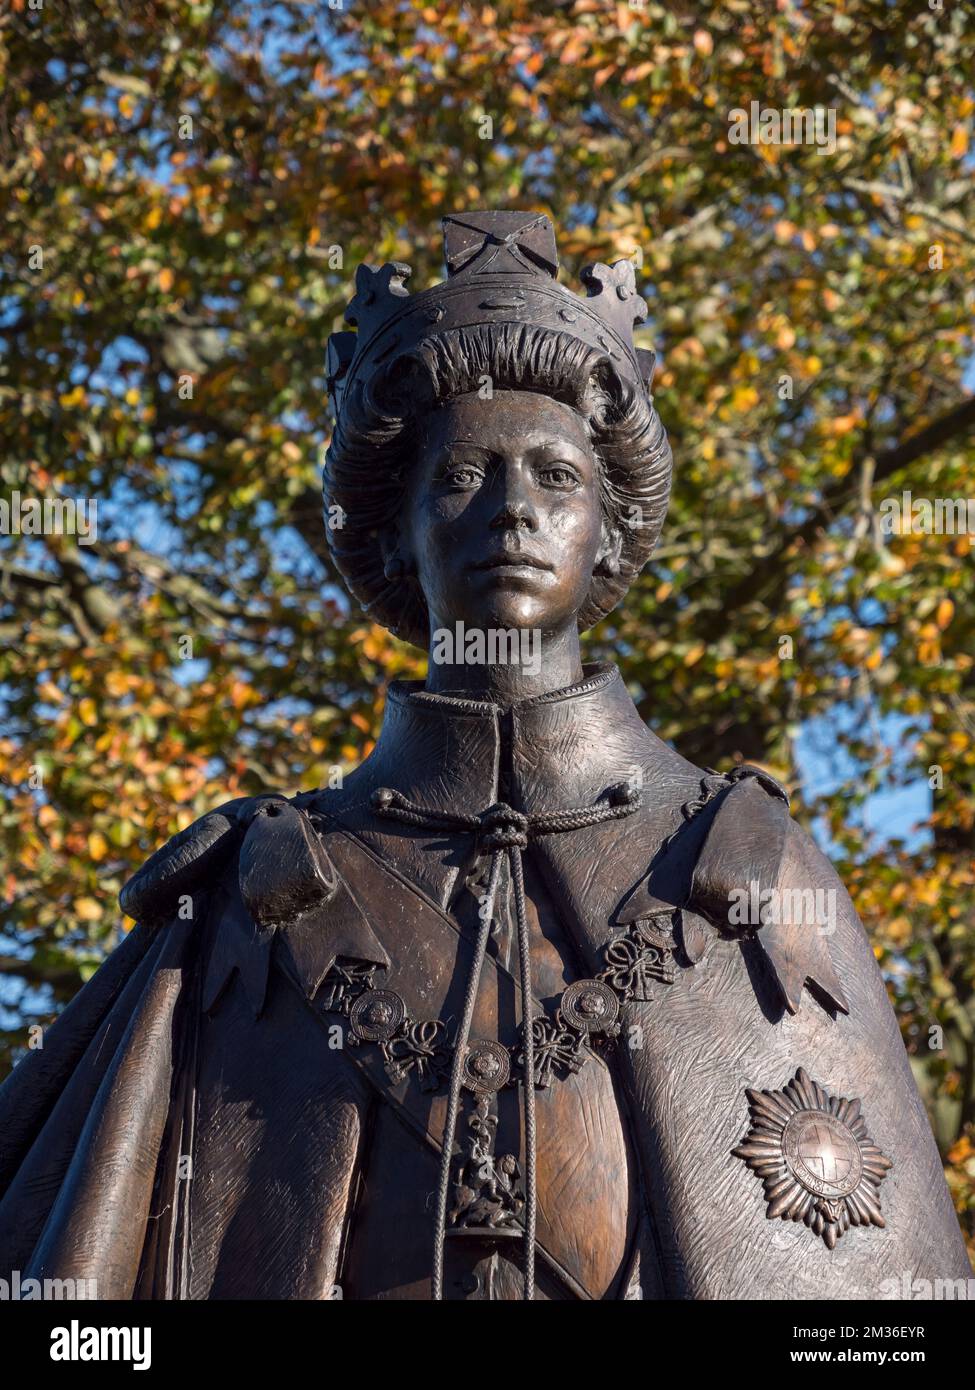 HM Queen Elizabeth II Statue created by sculptor James Butler on the Runnymede Pleasure Ground, Runnymede, UK. Stock Photo